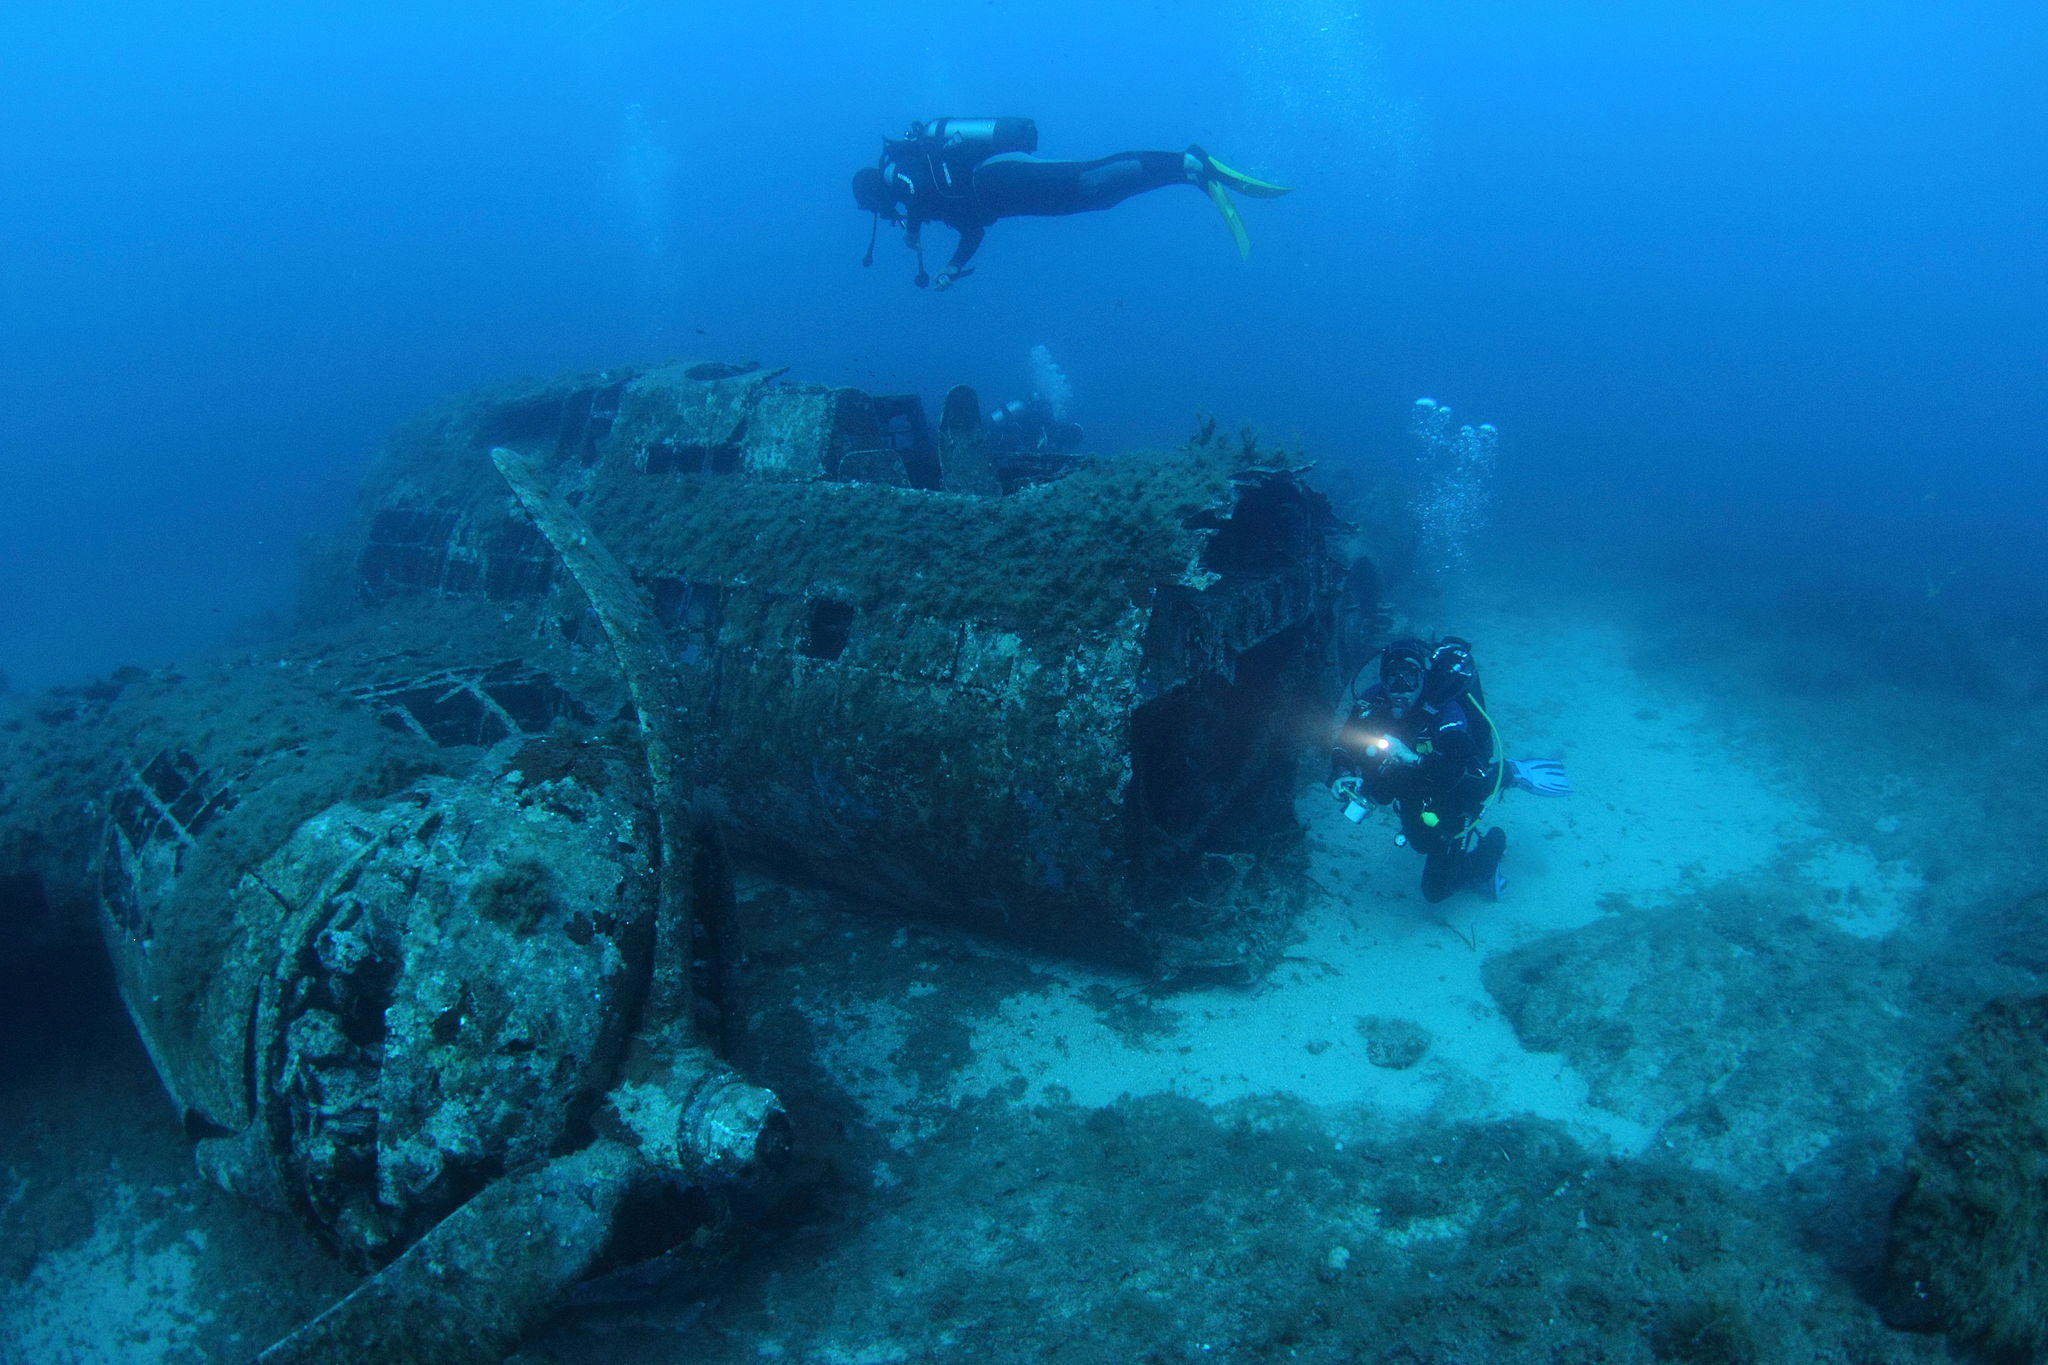 Scuba_divers_on_the_wreck_of_a_B-17_bomber